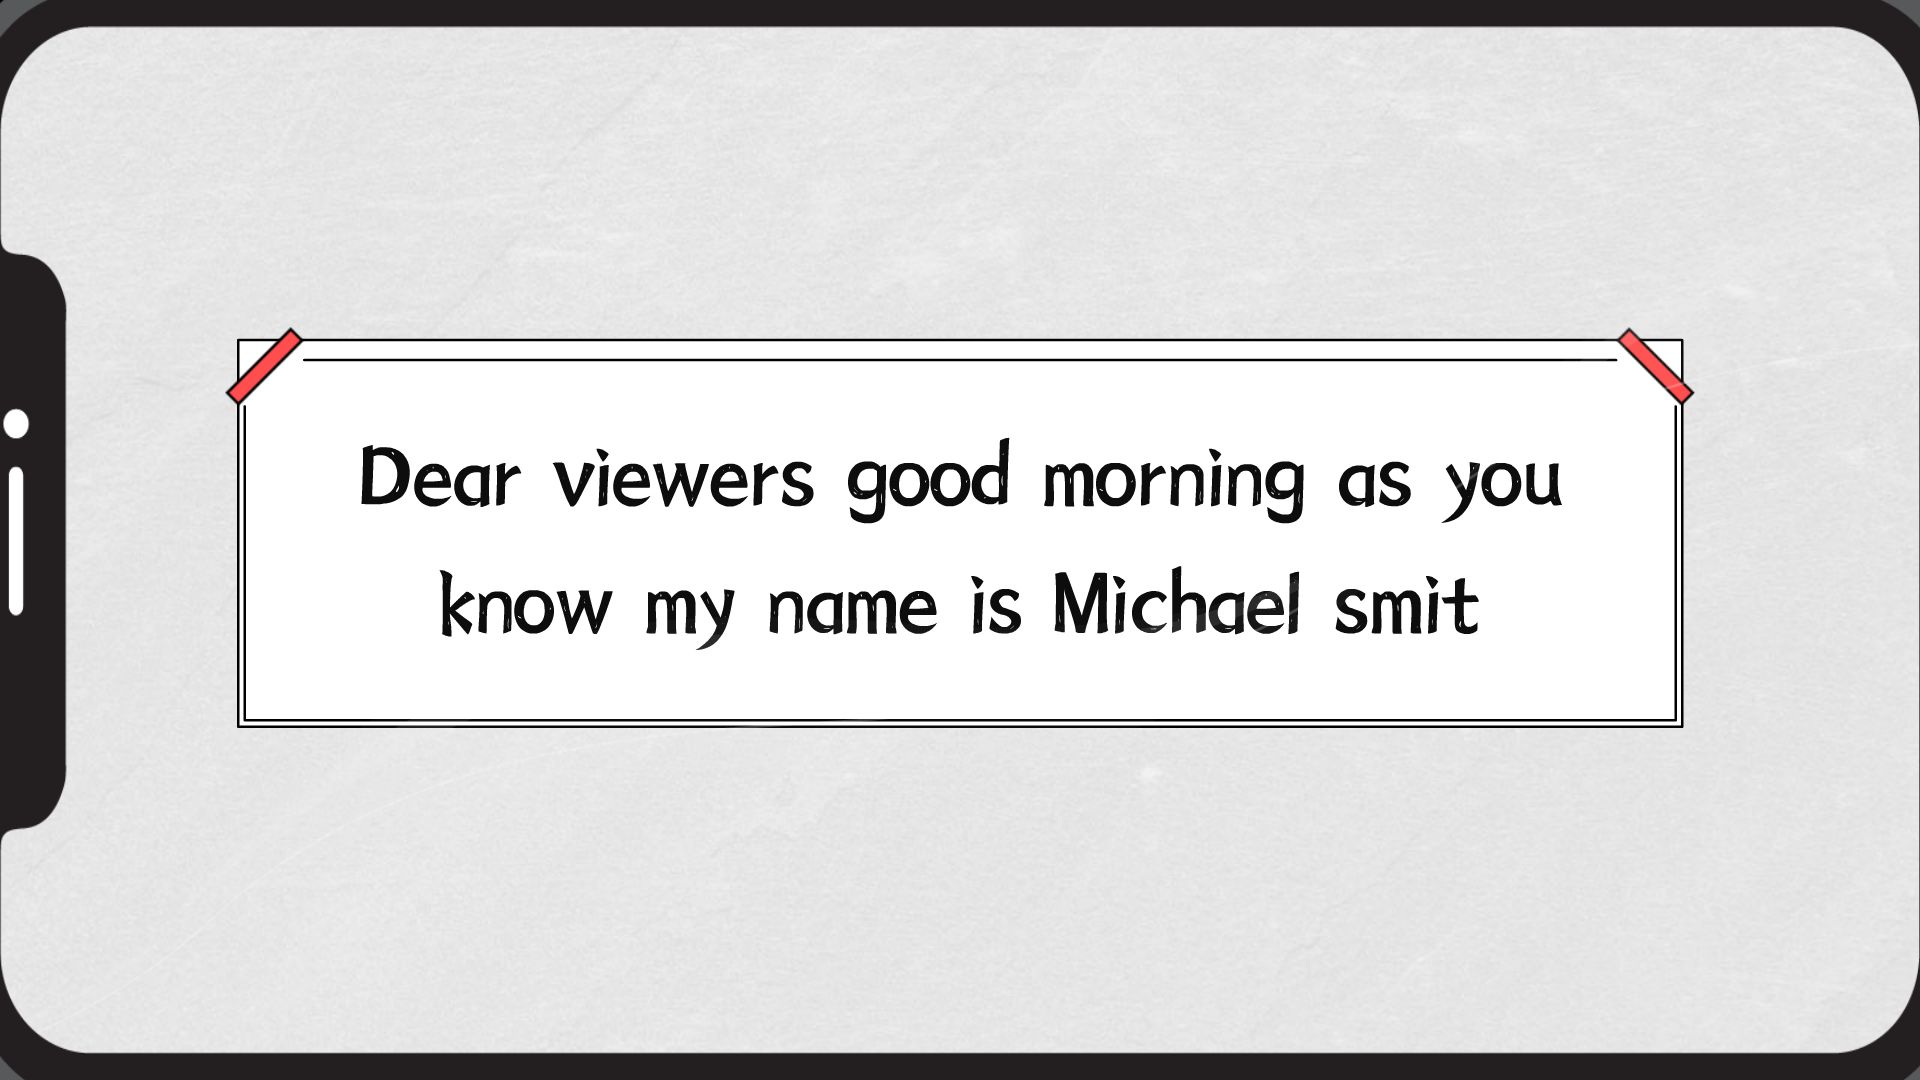 Dear viewers good morning as you know my name is Michael smit ...